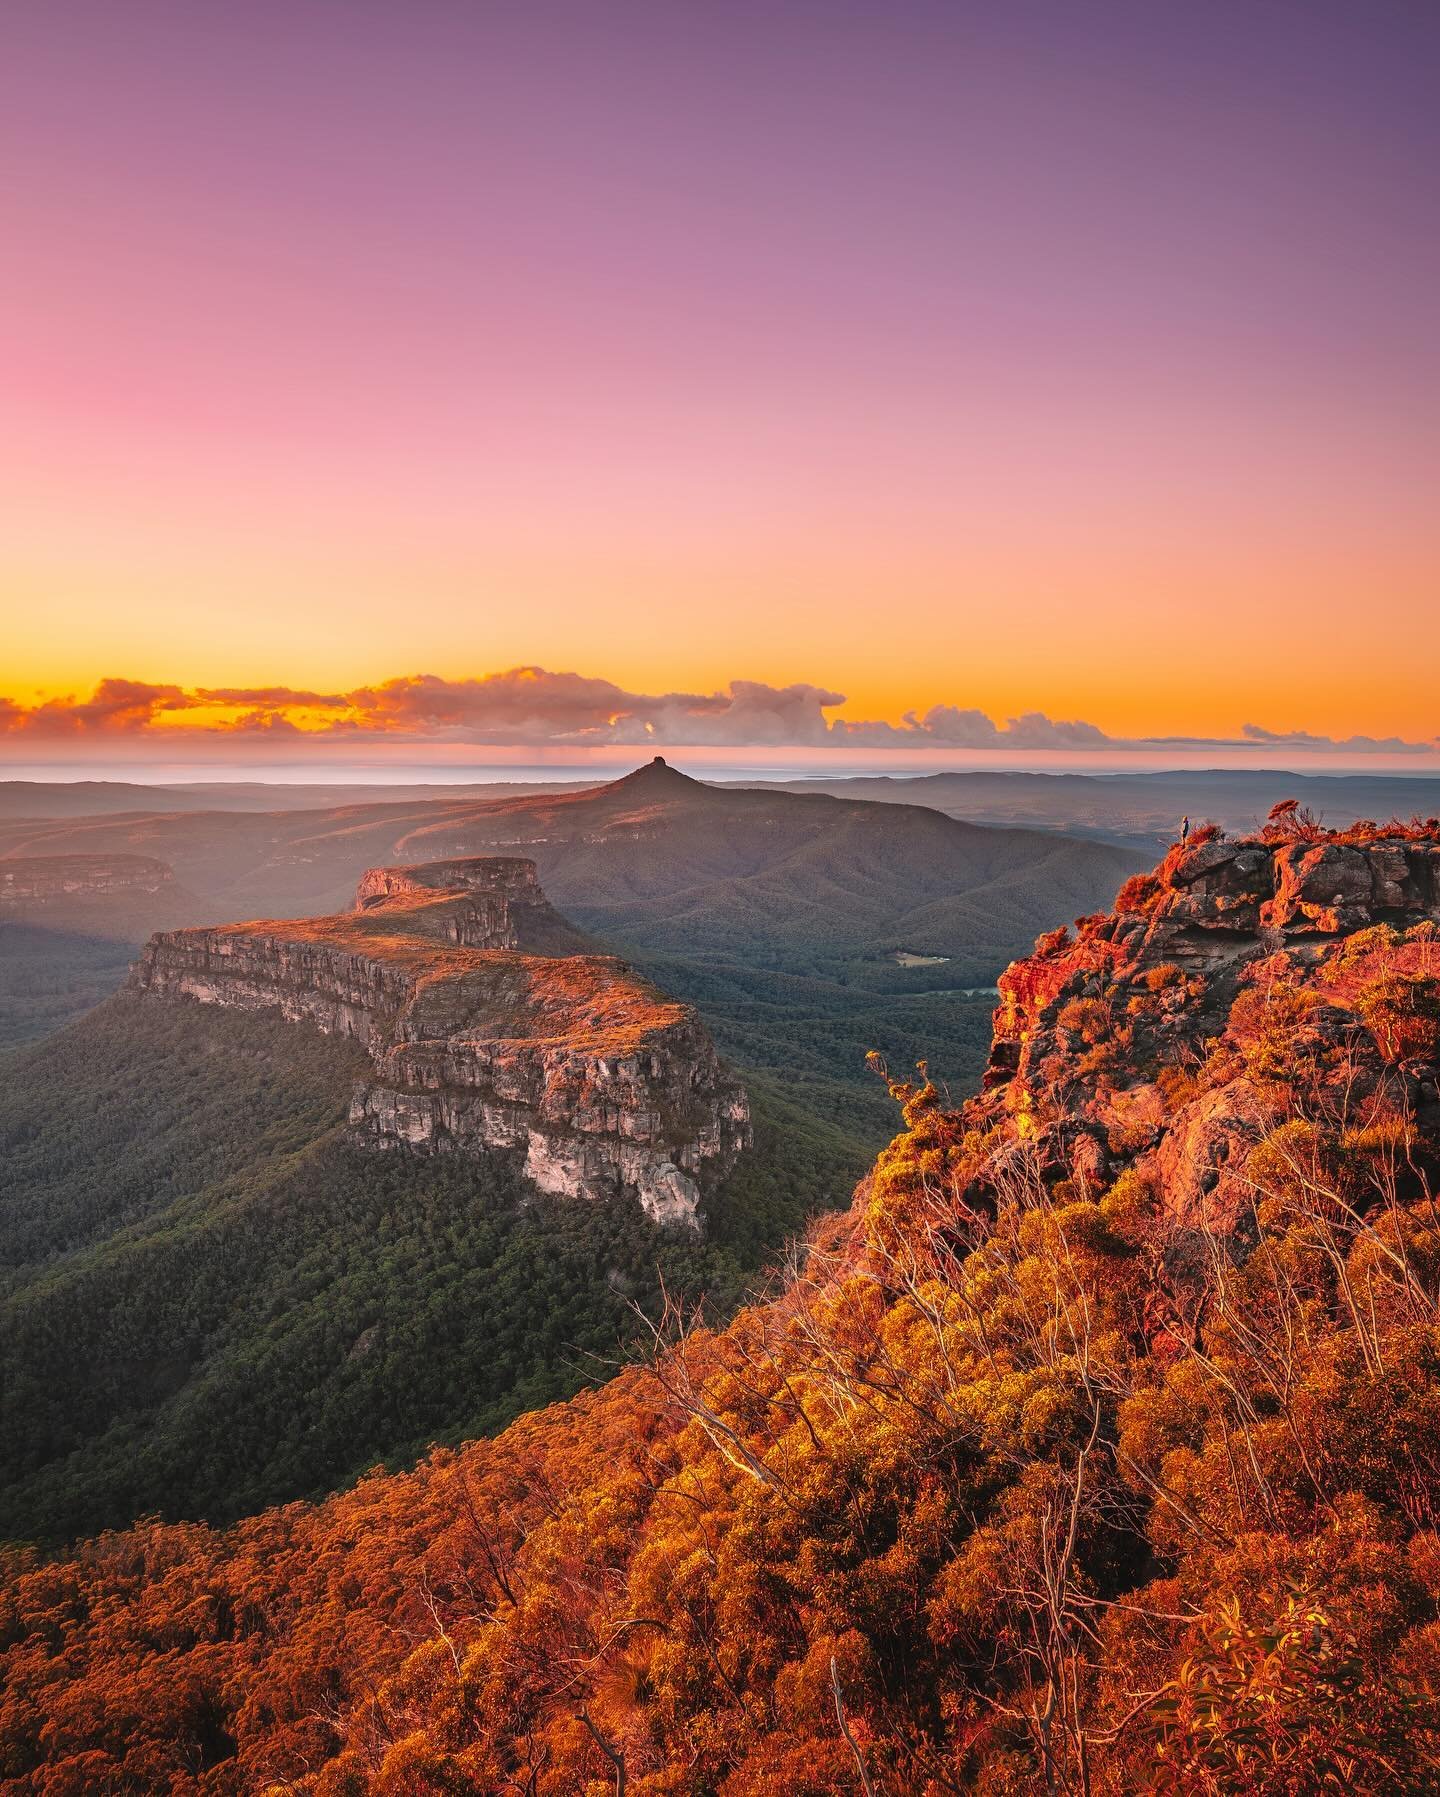 Sunrise on top of The Castle in Morton National Park. One of the more impressive views I&rsquo;ve seen in quit some time! The sight of the majestic rock formations ahead, particularly Pigeon House Mountain, is awe-inspiring. And if you look closely, 